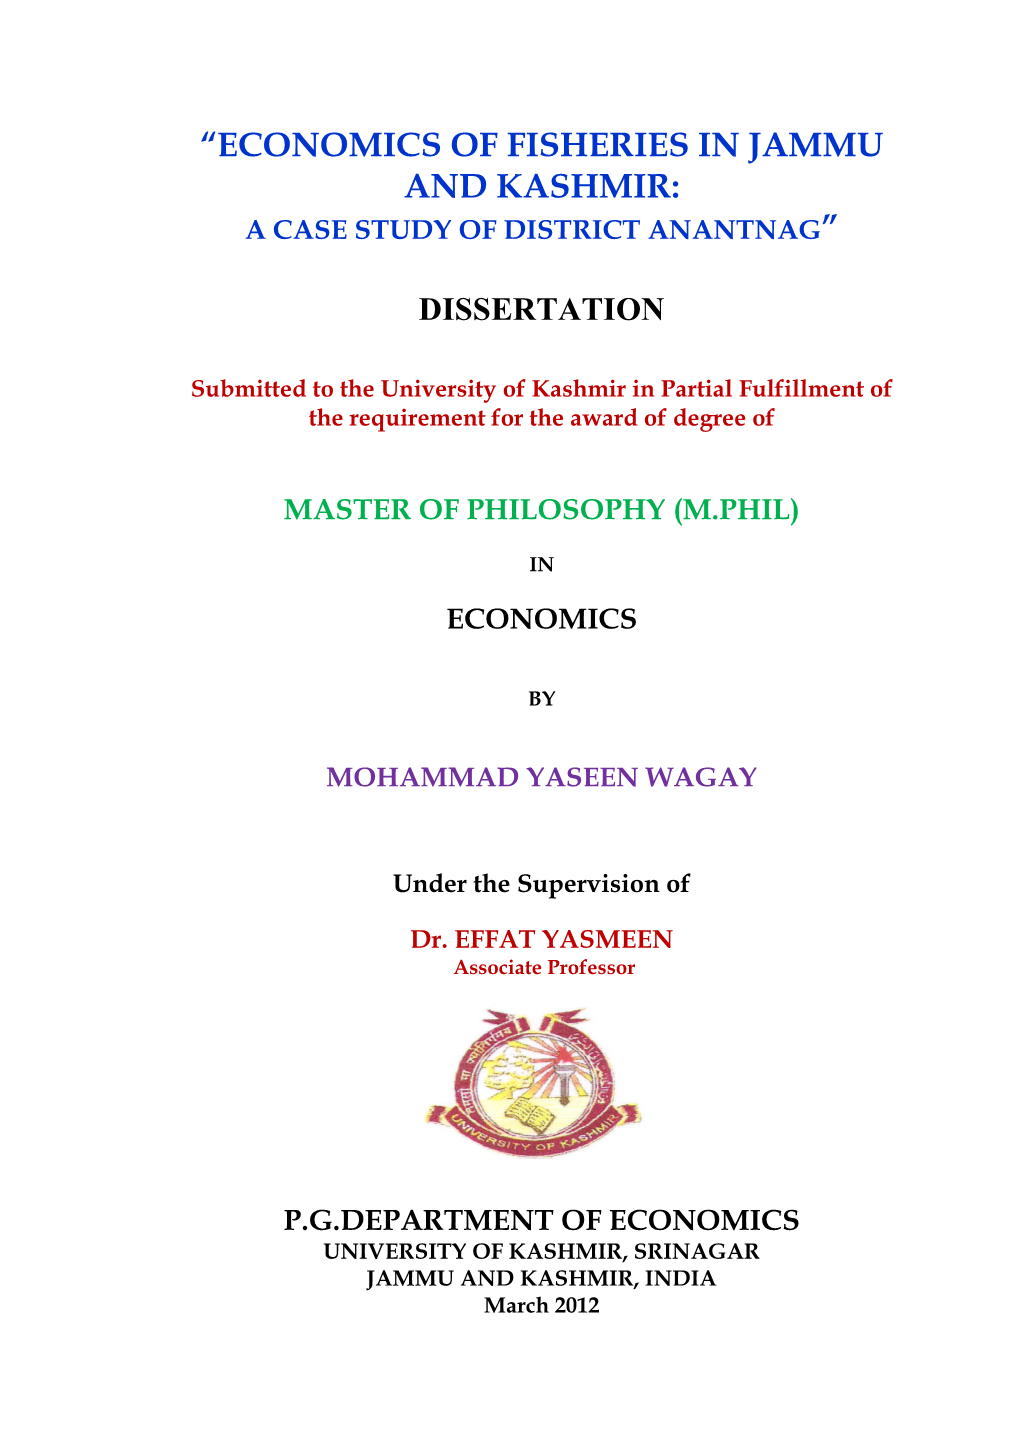 Economics of Fisheries in Jammu and Kashmir: a Case Study of District Anantnag”